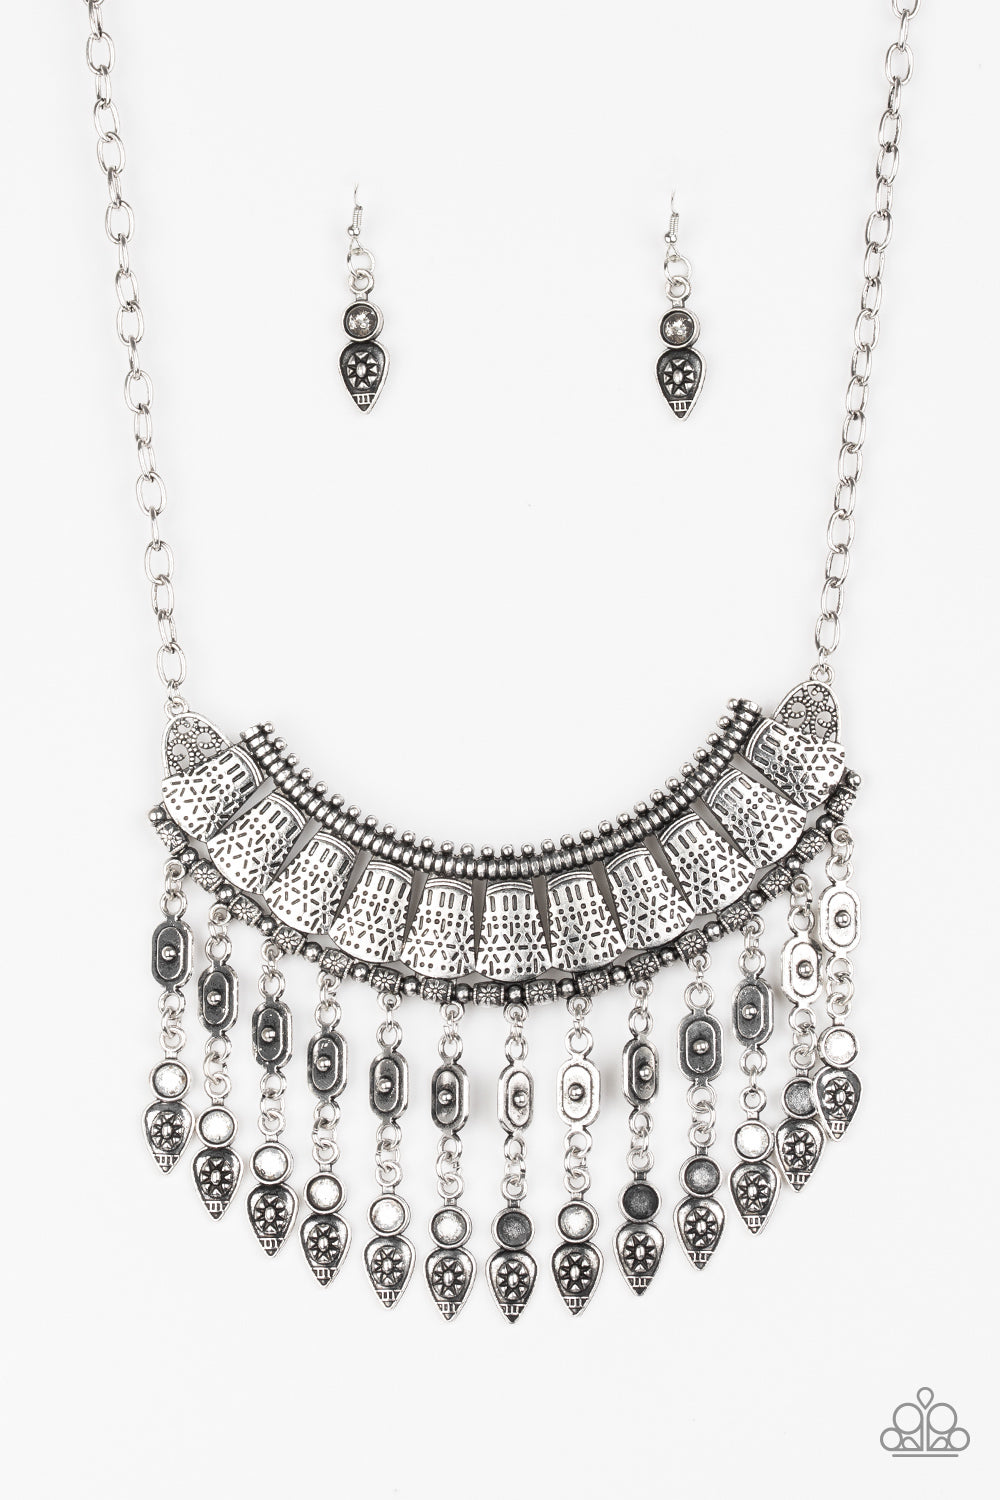 Paparazzi Accessories  - The Desert Is Calling - #N149 Silver Necklace